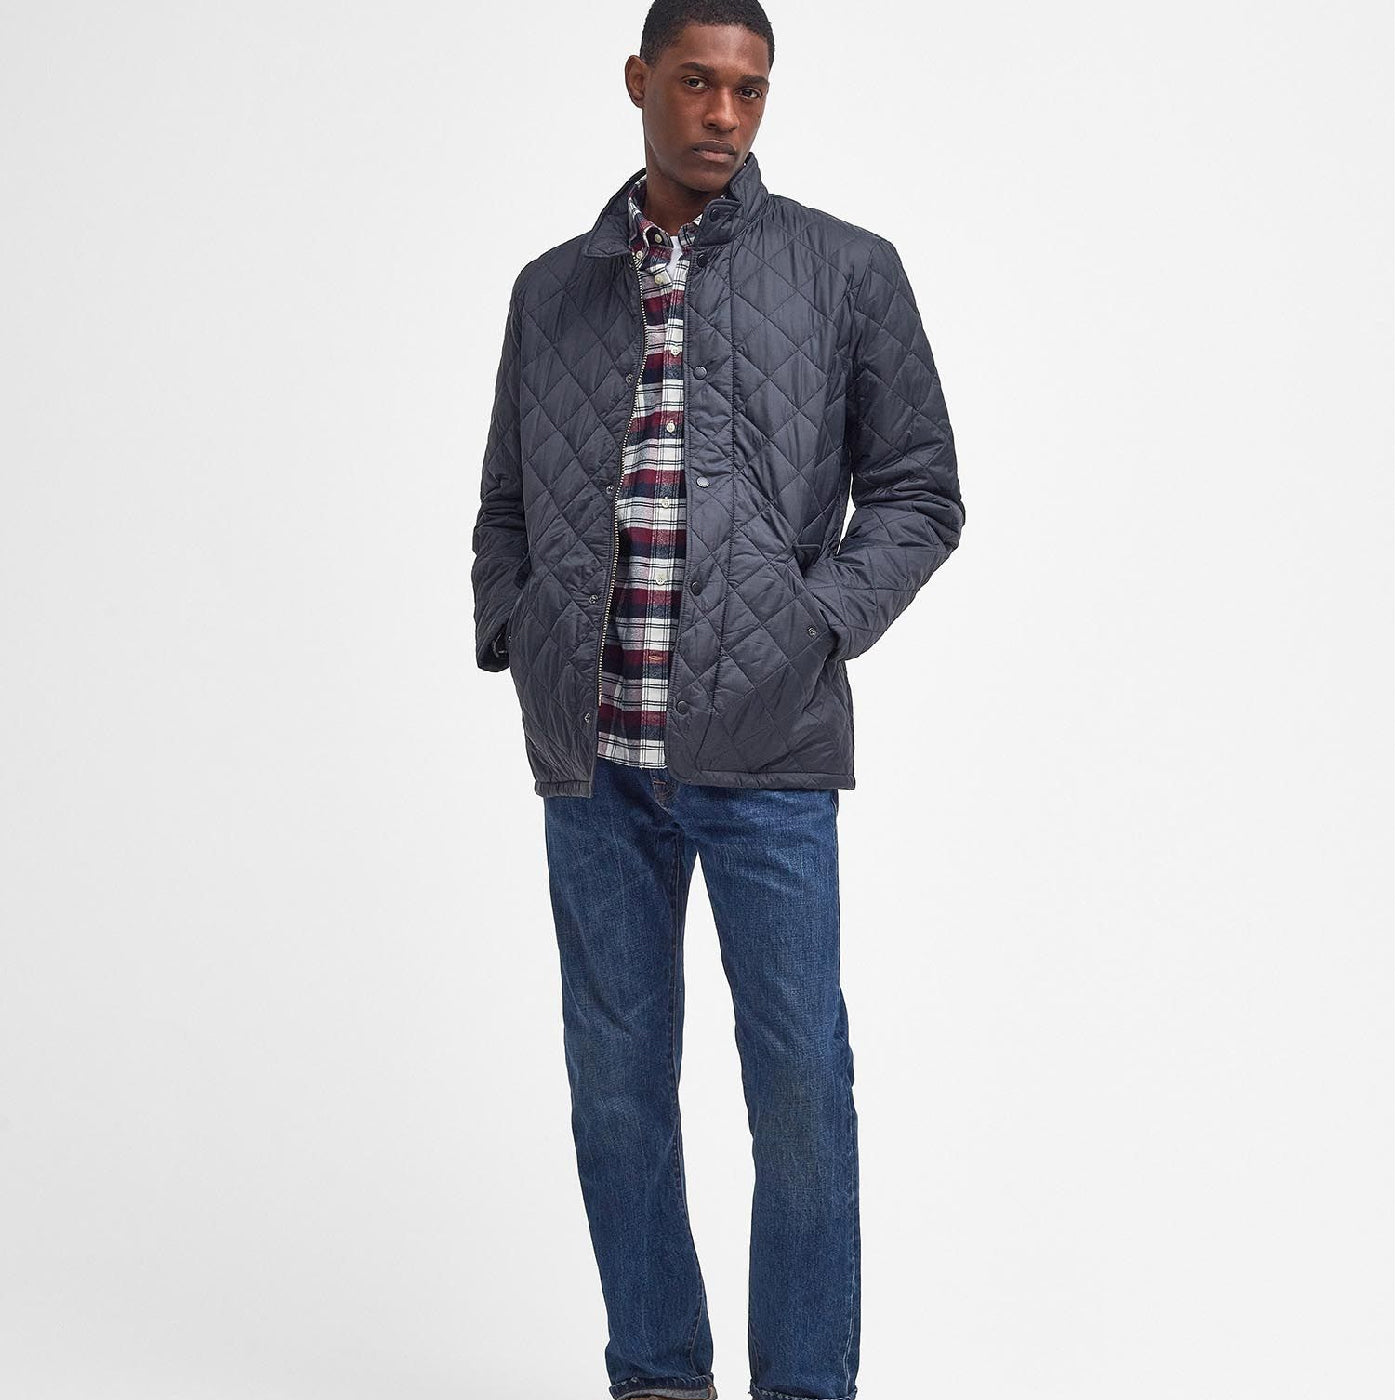 Barbour F/wgt Chelsea